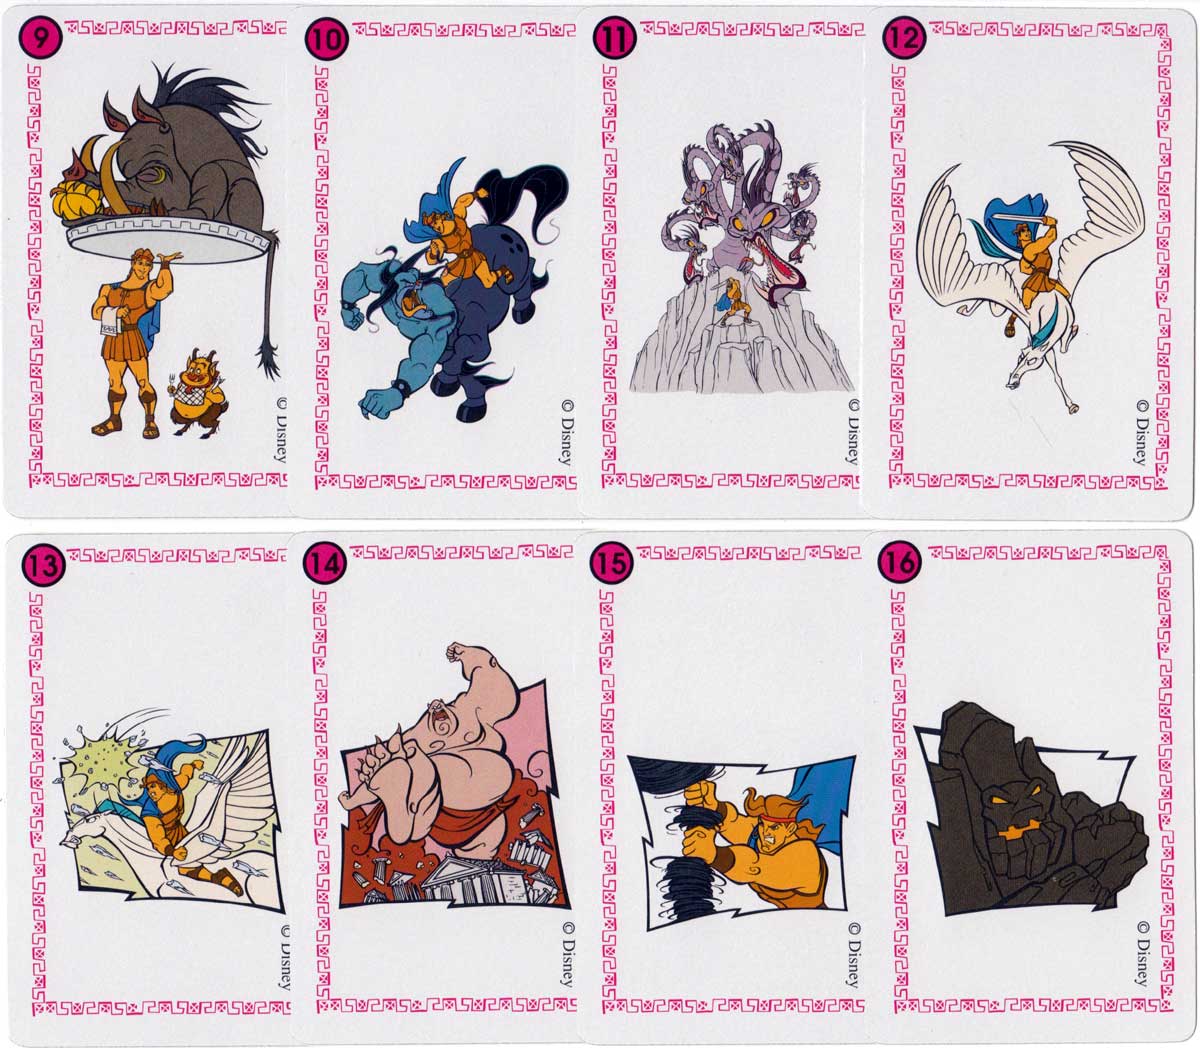 Hercules card game published by Herclio Fournier, 1997